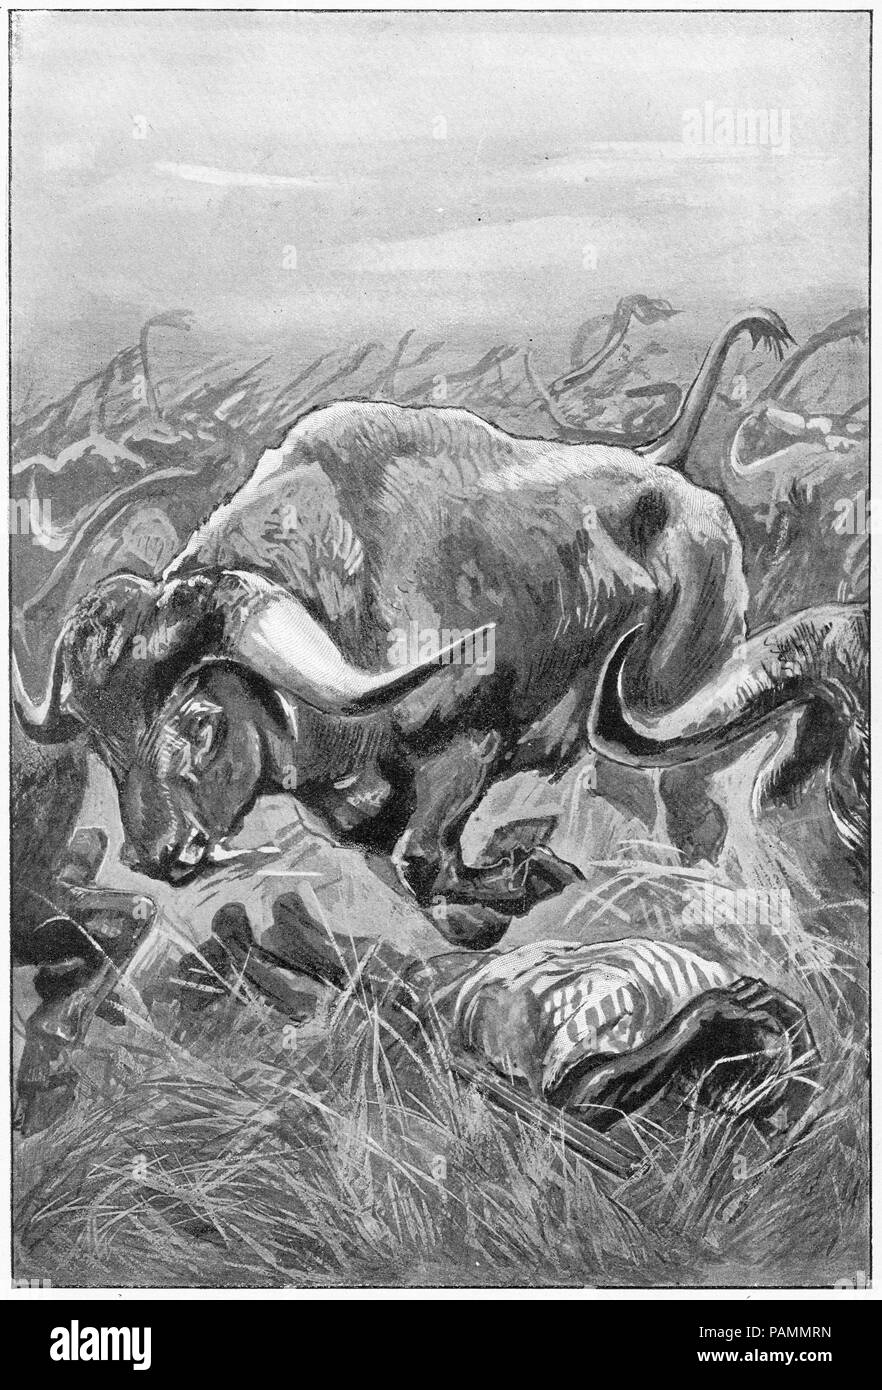 Hal;tone of a herd of buffalo stampeding over people in India. From Young England, An Illustrated Monthly for Boys, 1903. Stock Photo